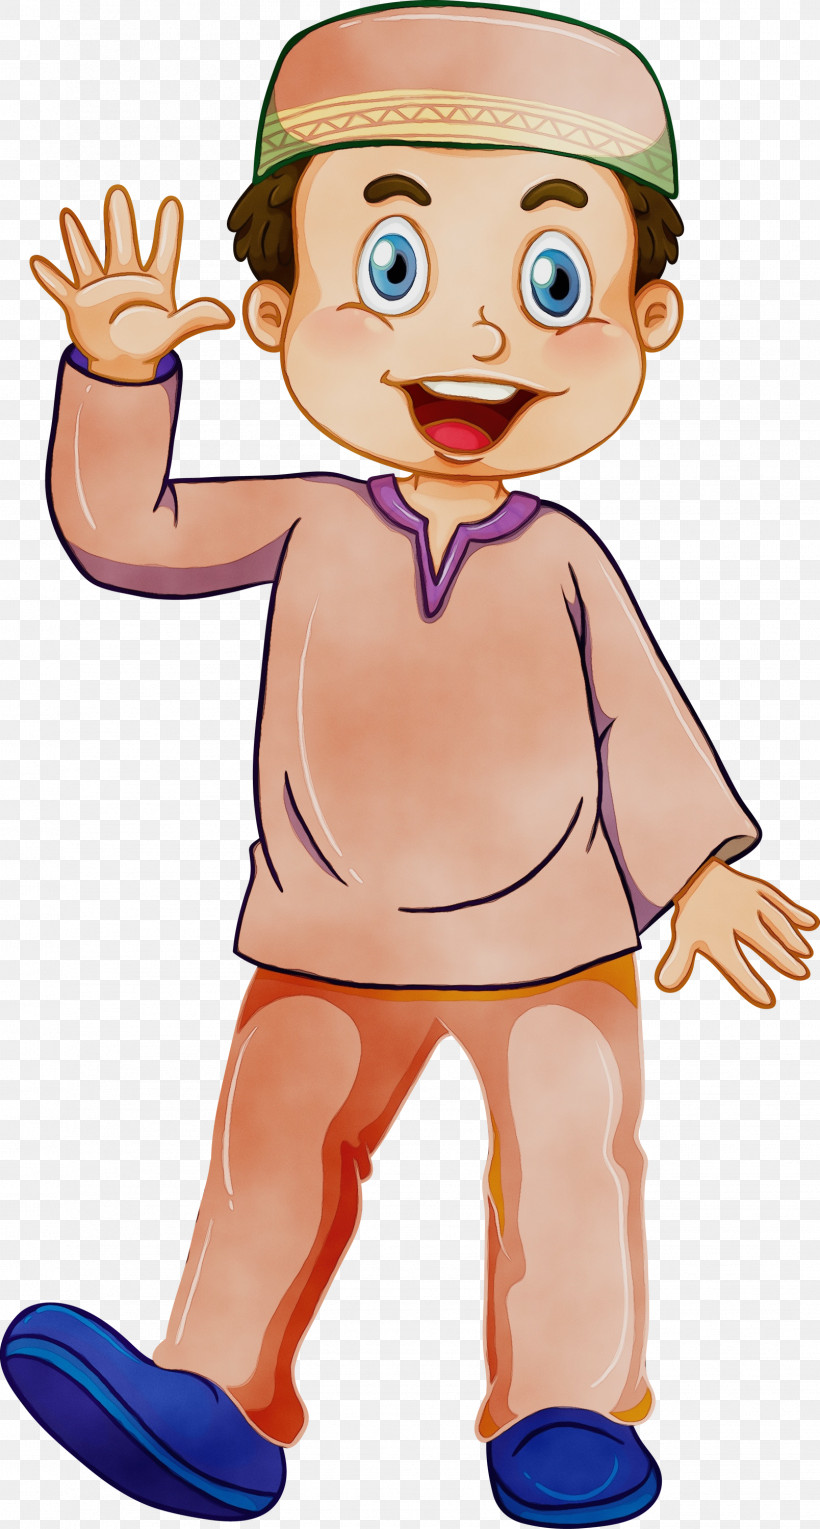 Cartoon Finger Child Toddler Thumb, PNG, 1608x3000px, Muslim People, Cartoon, Child, Finger, Gesture Download Free